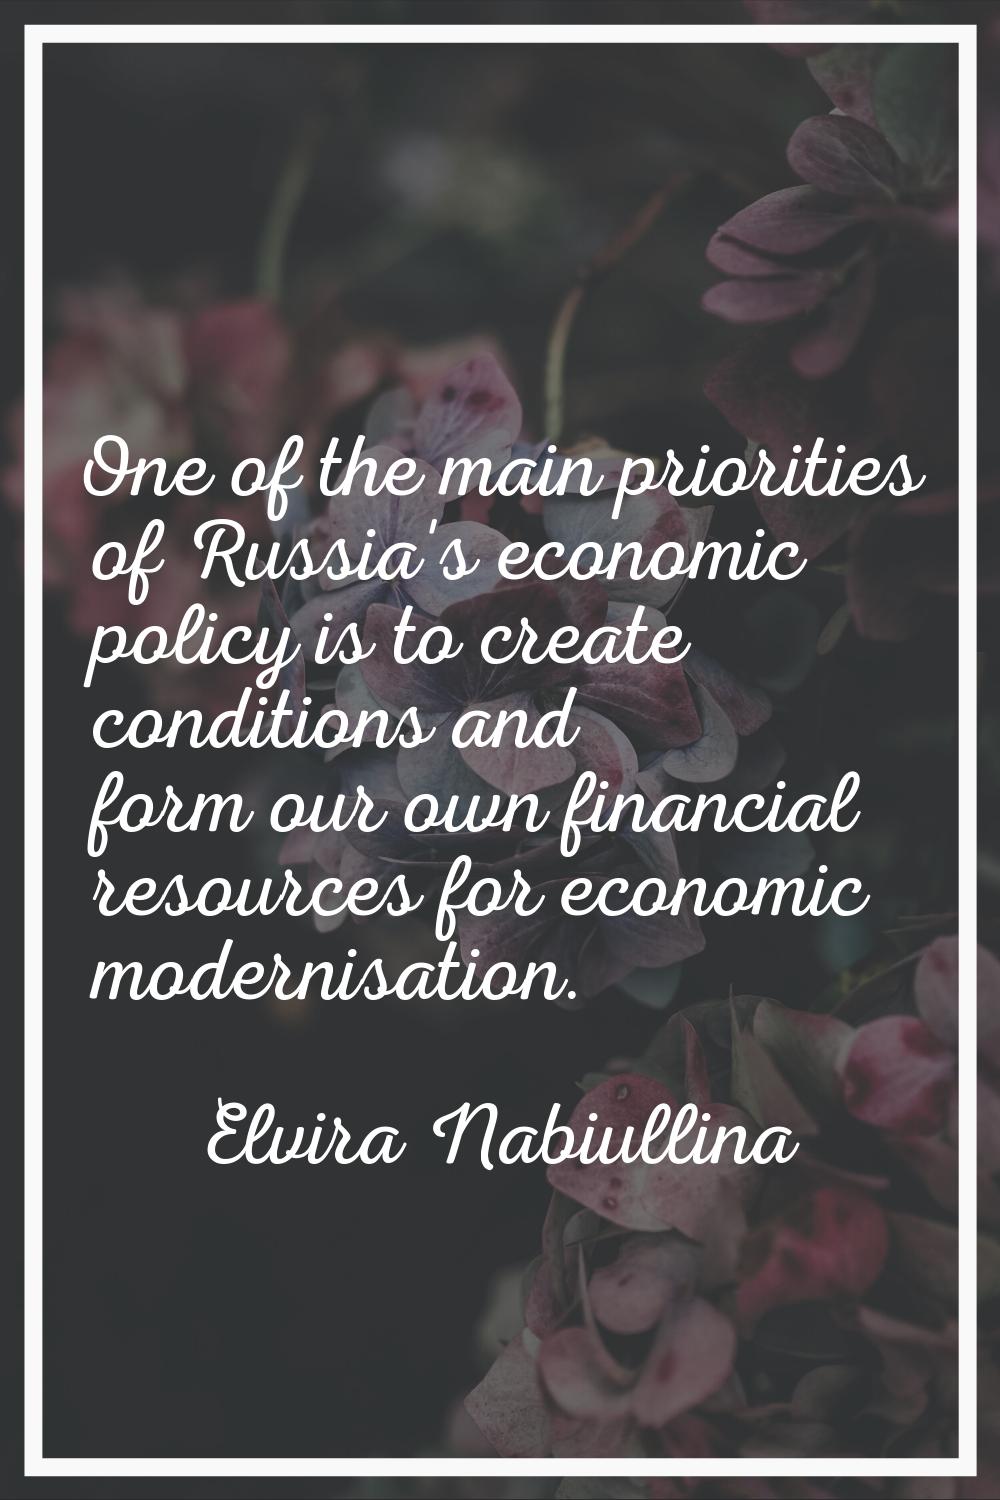 One of the main priorities of Russia's economic policy is to create conditions and form our own fin